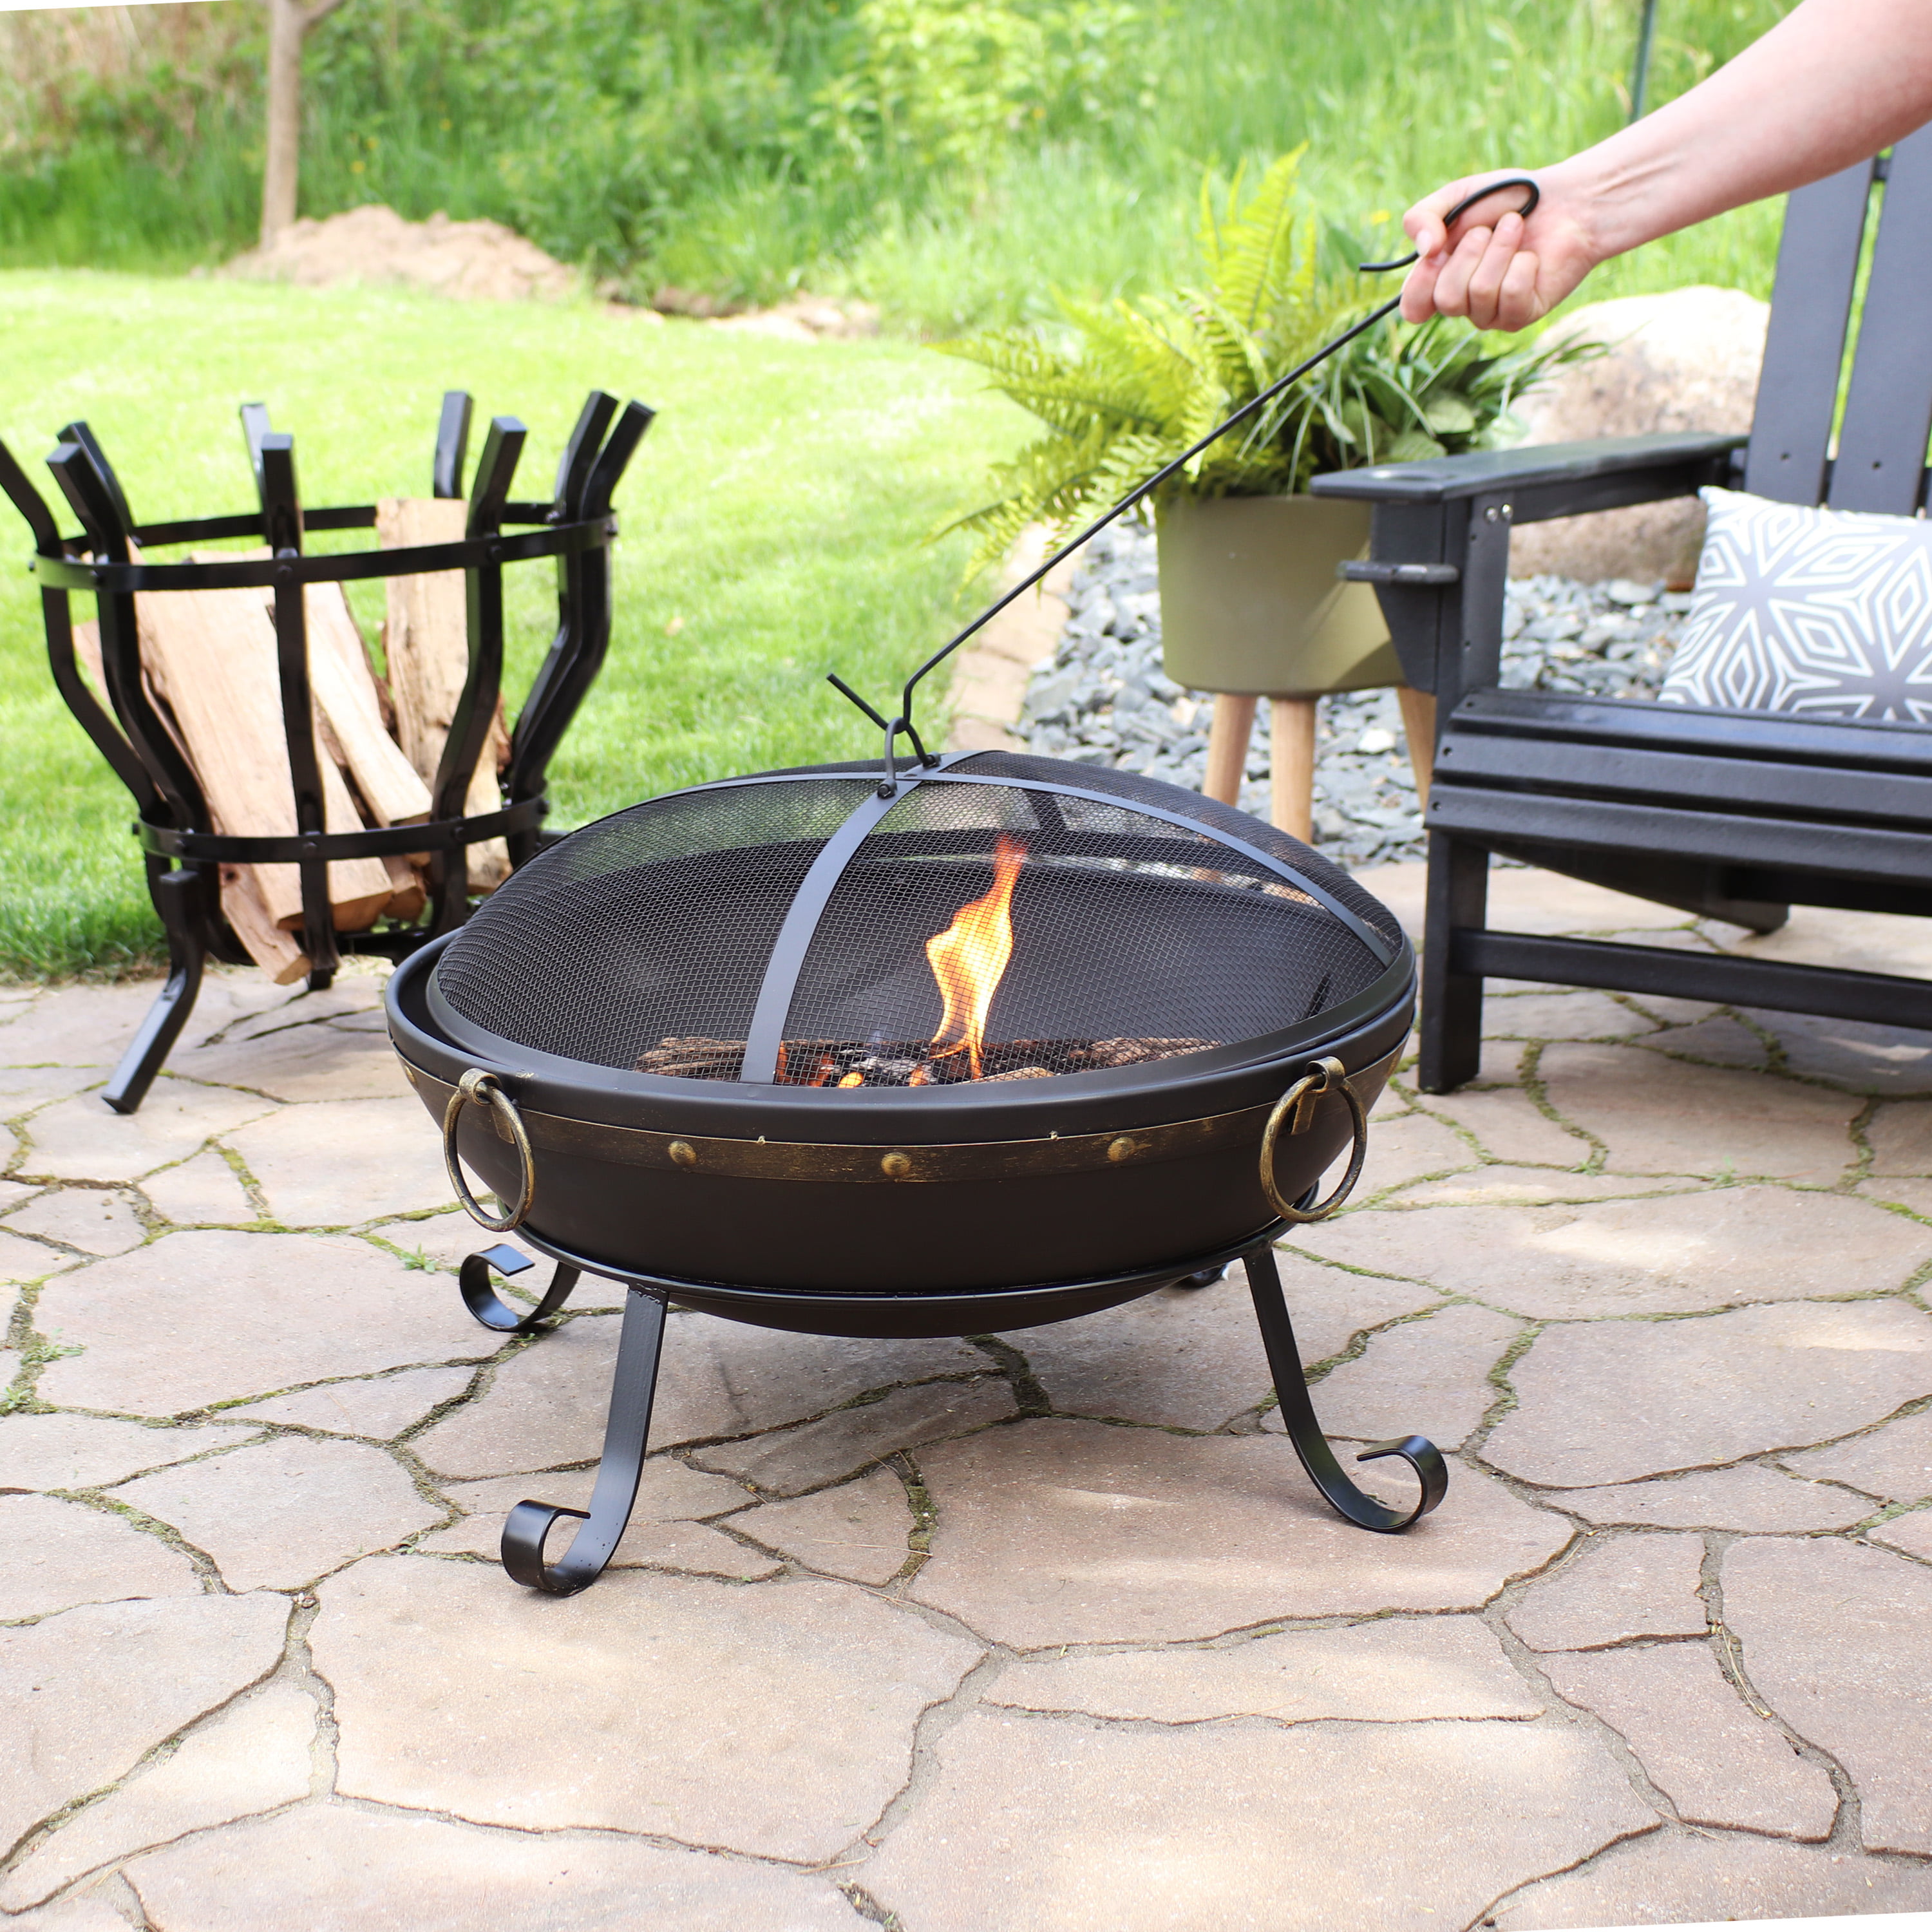 Sunnydaze Rustic Cast Iron Fire Pit Bowl With Handles Outdoor Wood